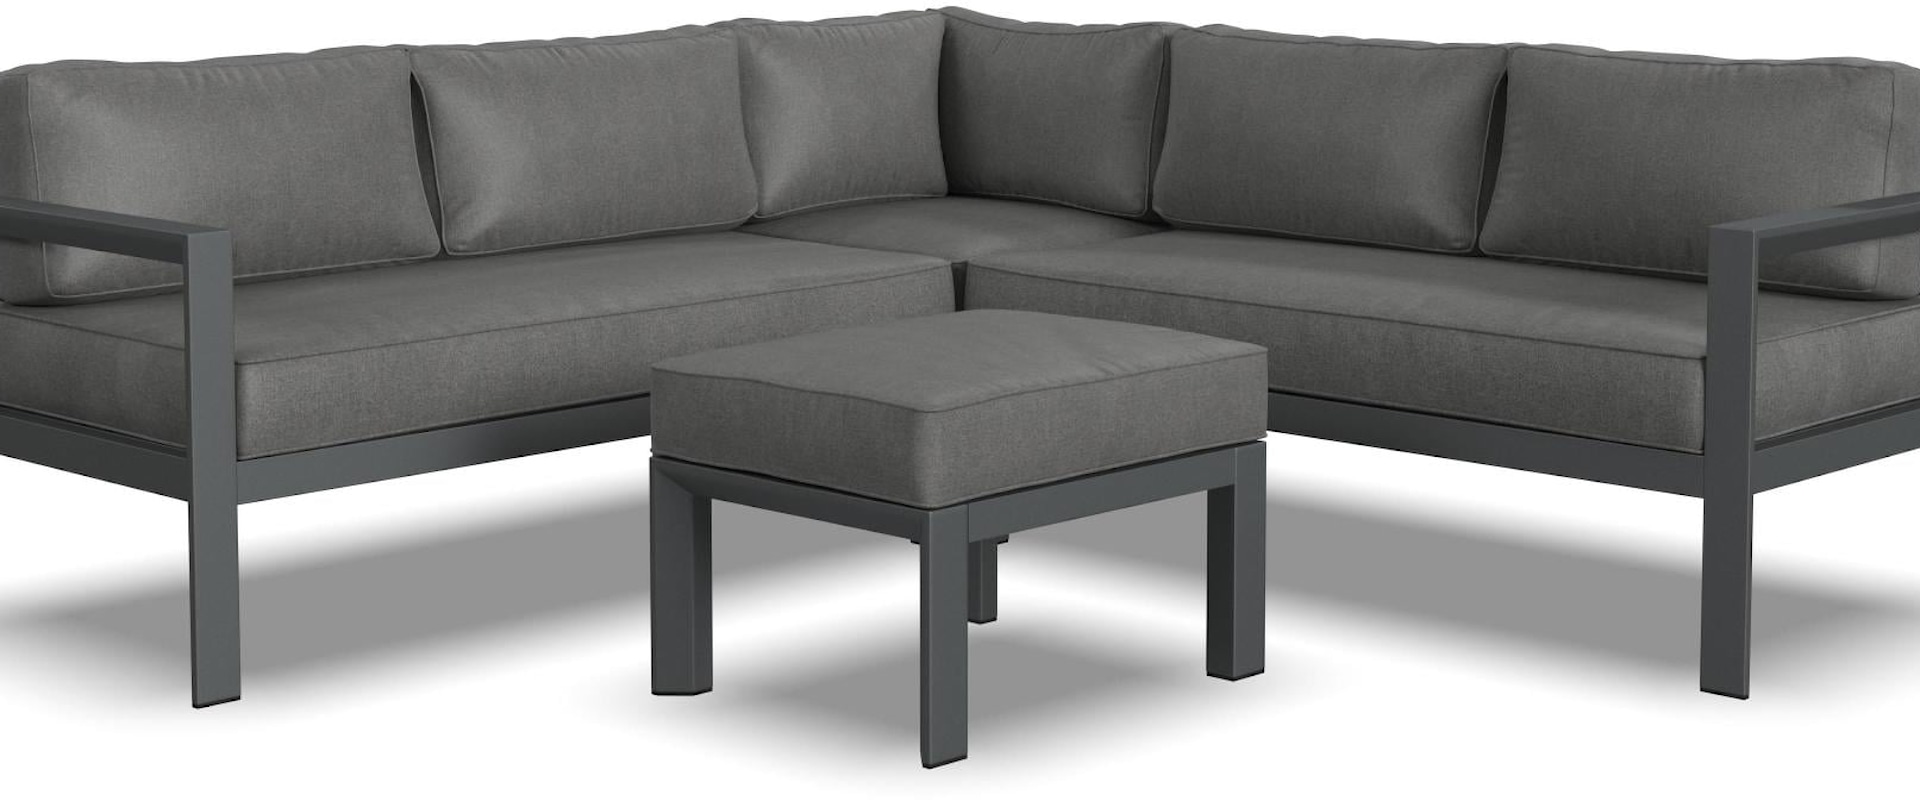 Contemporary 5-Seat Sectional Sofa with Ottoman